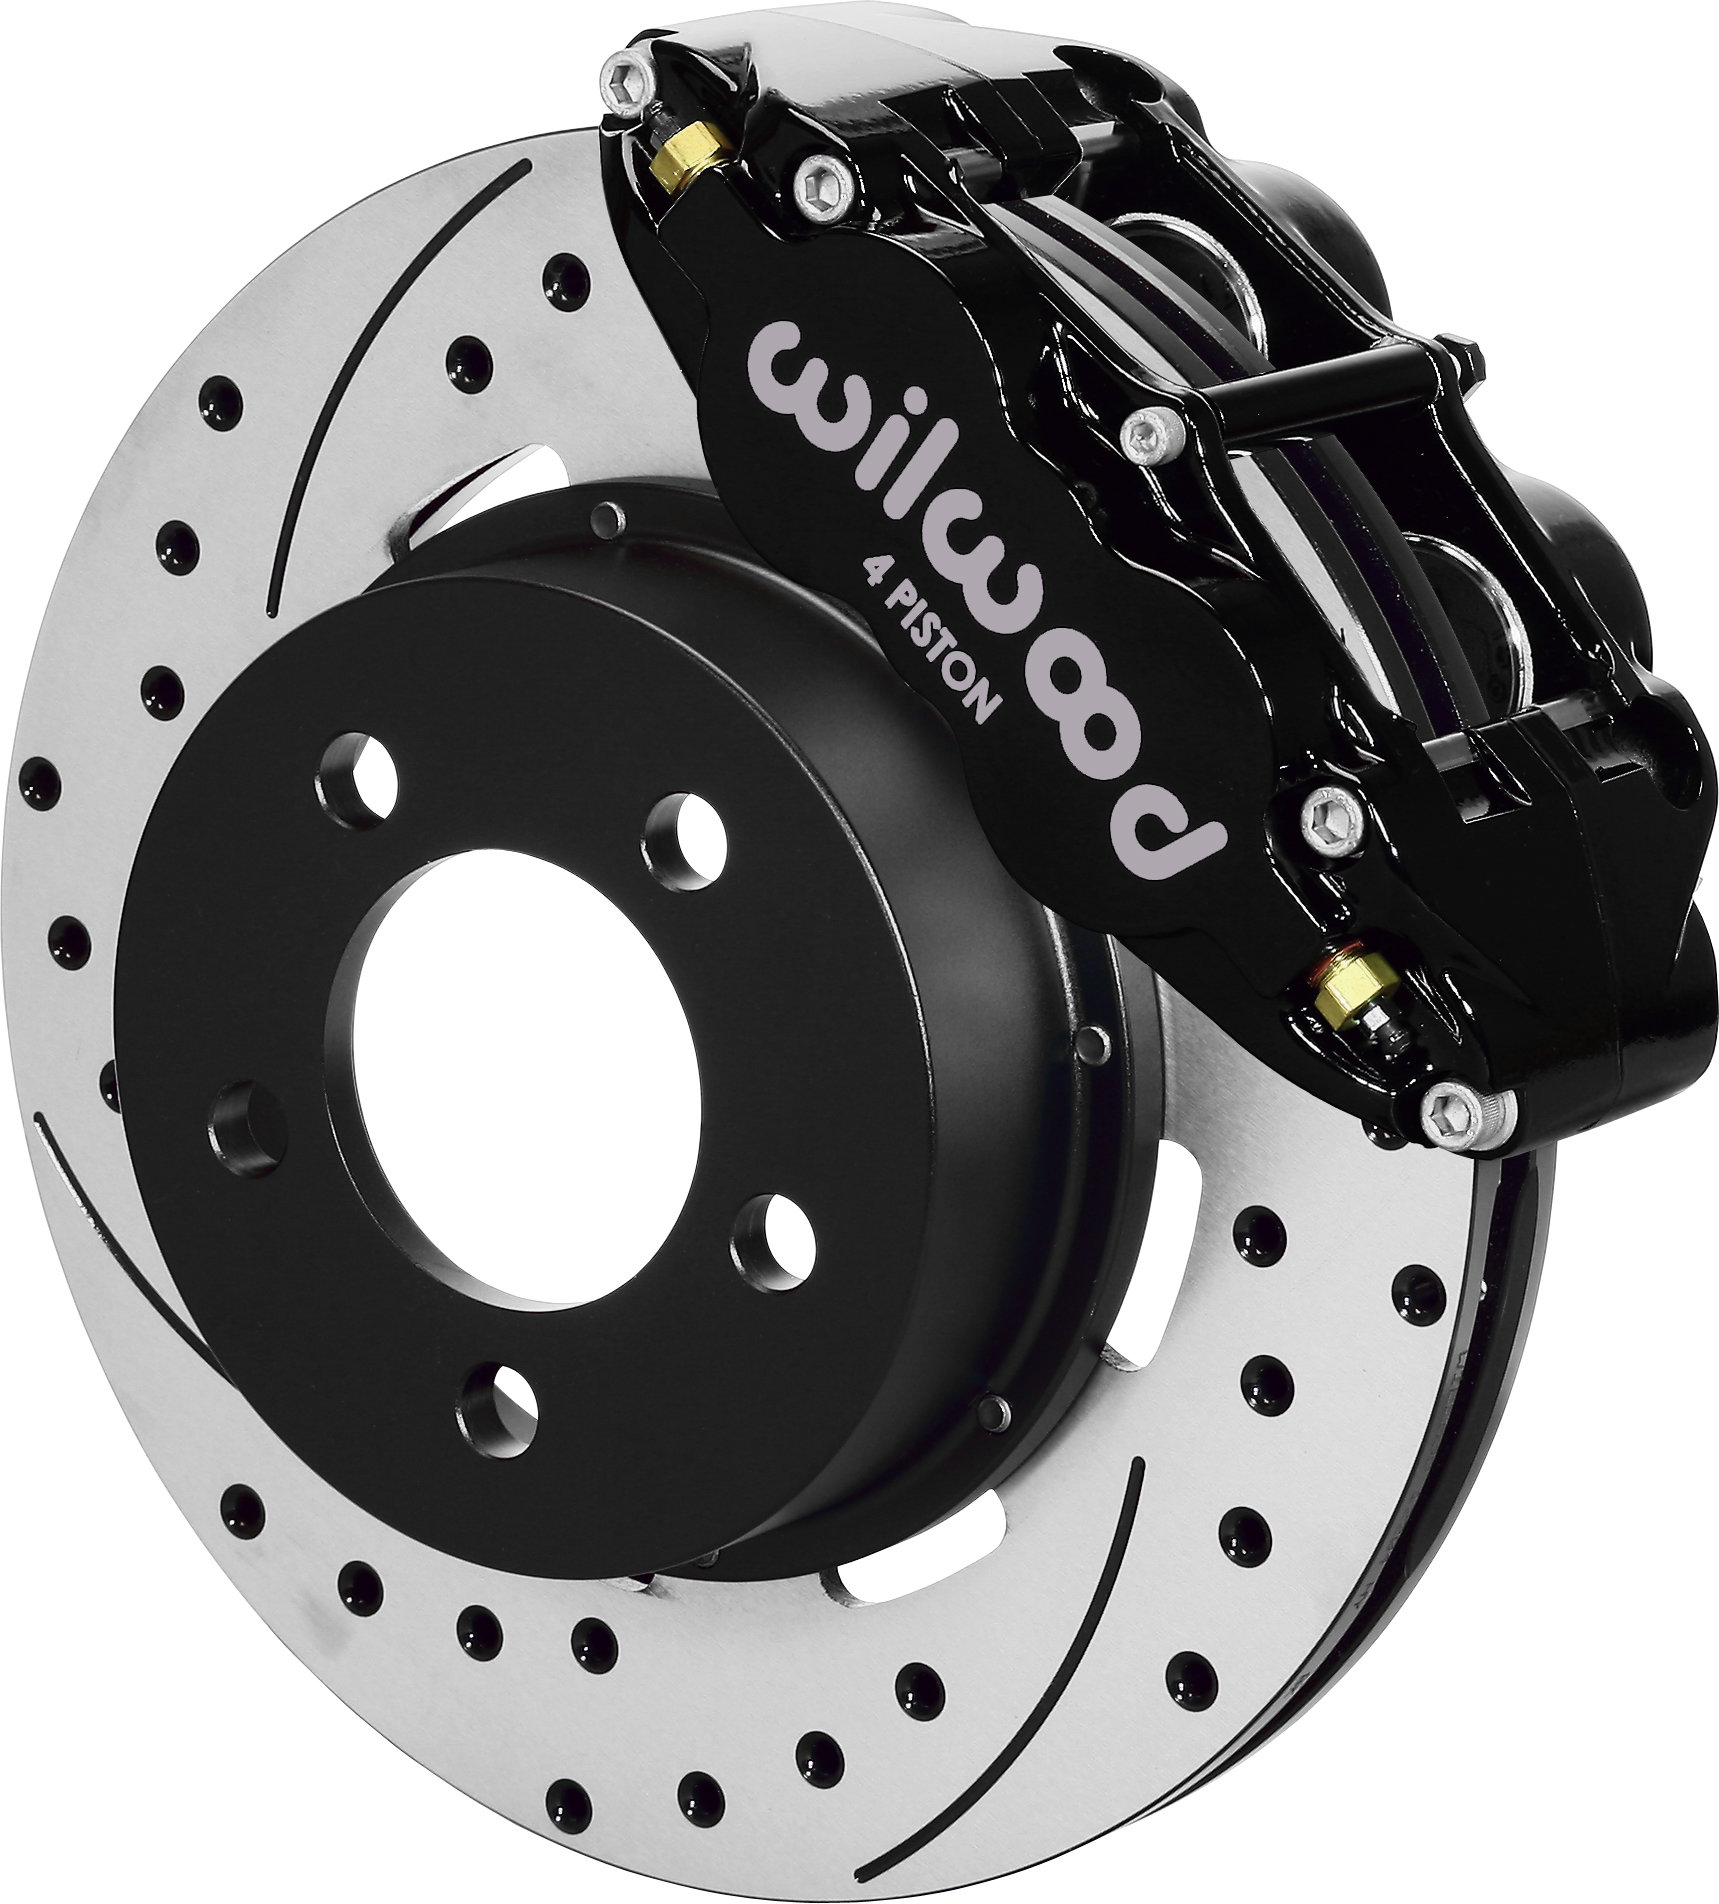 Wilwood Forged Narrow Superlite 4R Big Brake Kit with Drilled Rotors for  87-89 Jeep Wrangler YJ with Dana 30 Front Axle | Quadratec